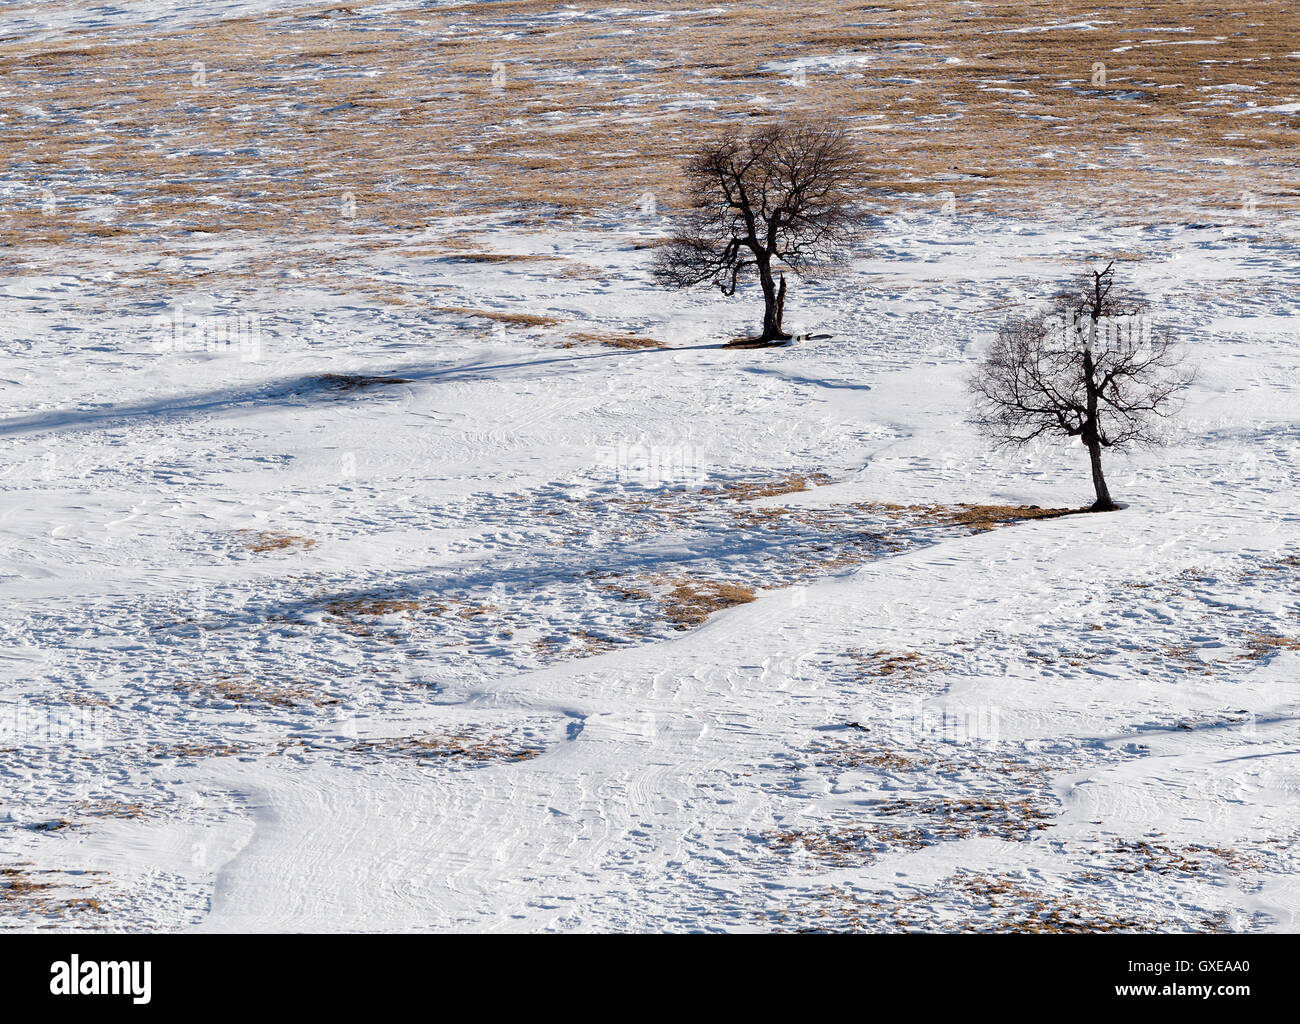 Seasonal nature image: landscape with two lonely  winter trees (black silhouettes) among a snowy plain with a snow pattern. Stock Photo